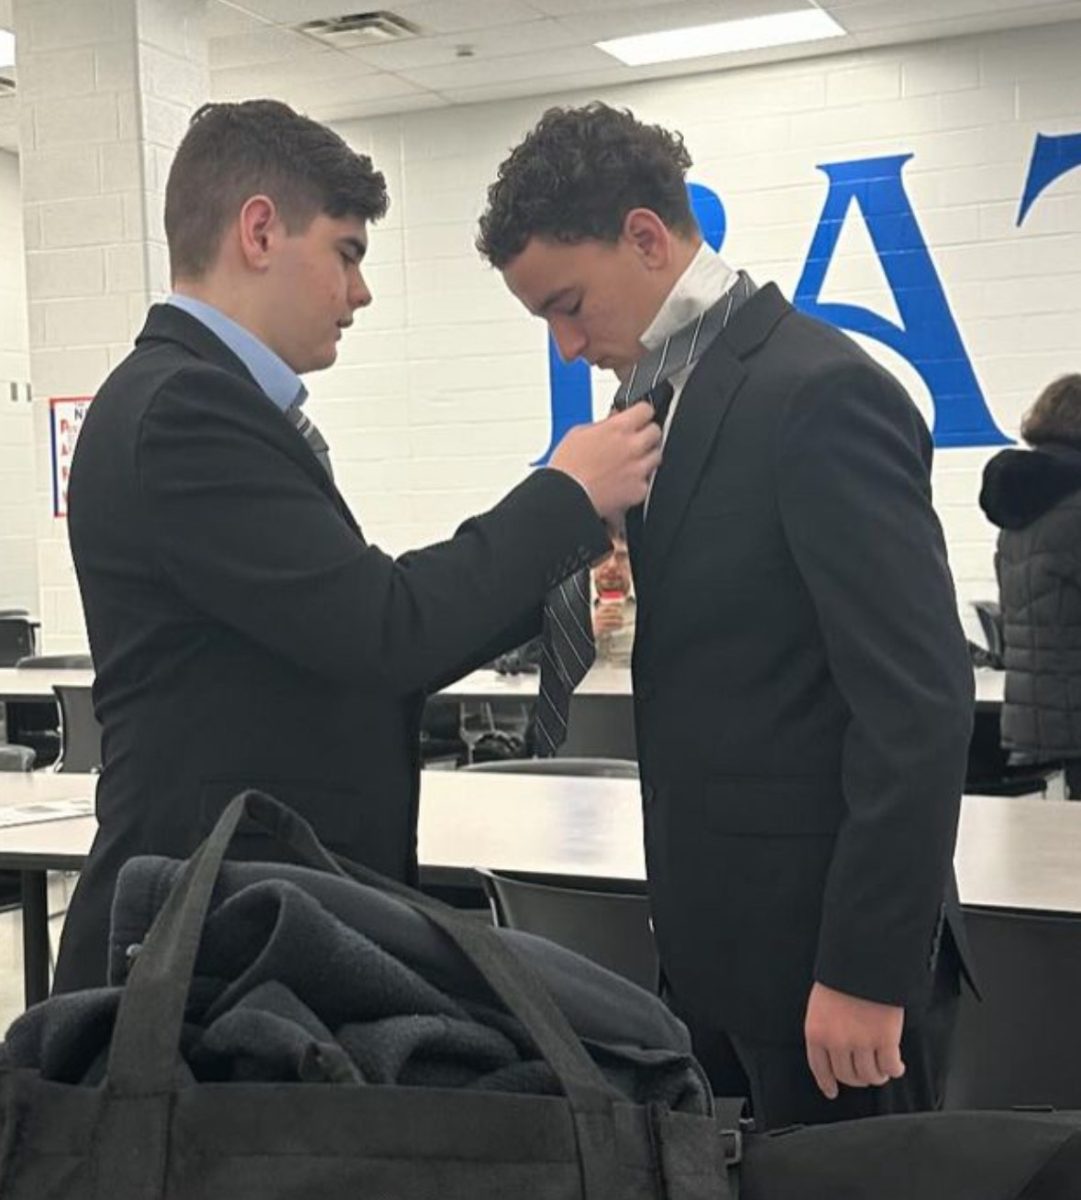 Cash Givens adjusts the tie of his duo interpretation partner, Jerome Maynard, at the Winter Classic tournament. 